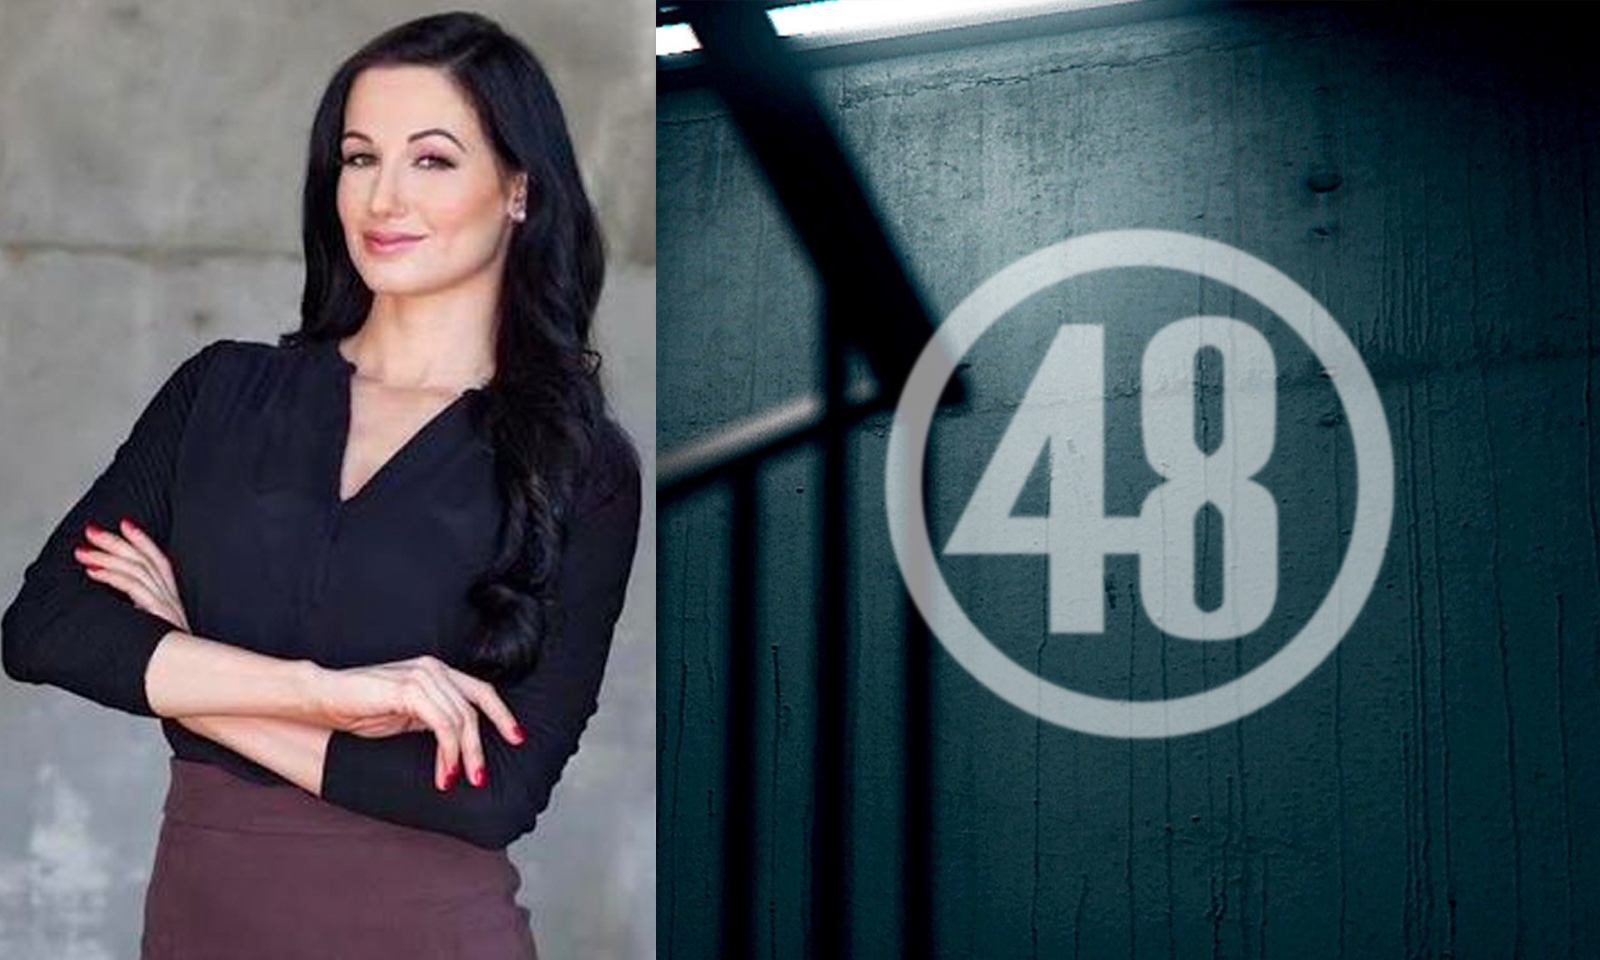 '48 Hours' to Air Episode on Death of Amie Harwick